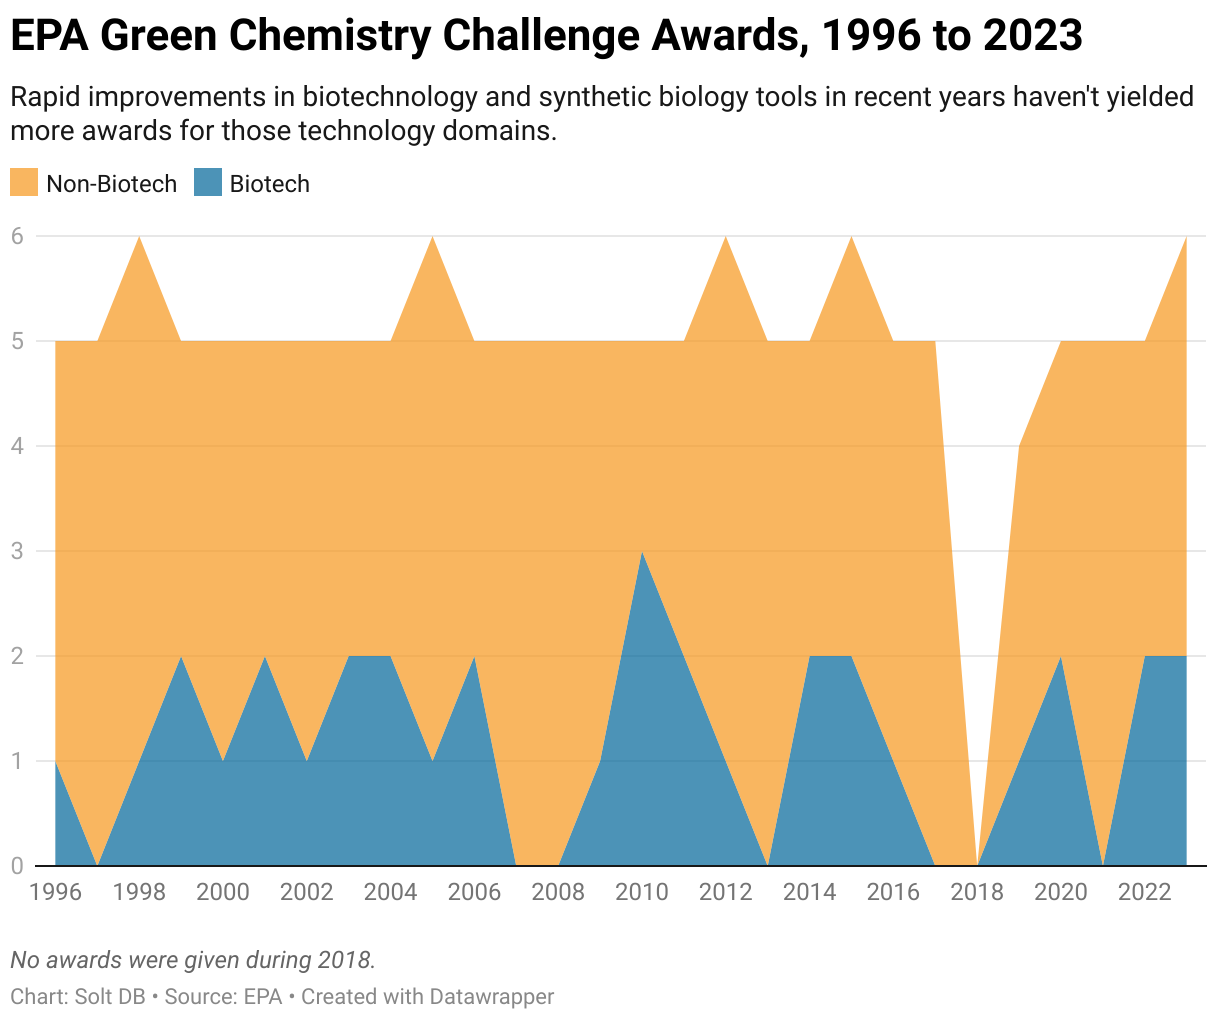 An area chart showing the number of EPA Green Chemistry Challenge Awards each year and how many are biotechnology.